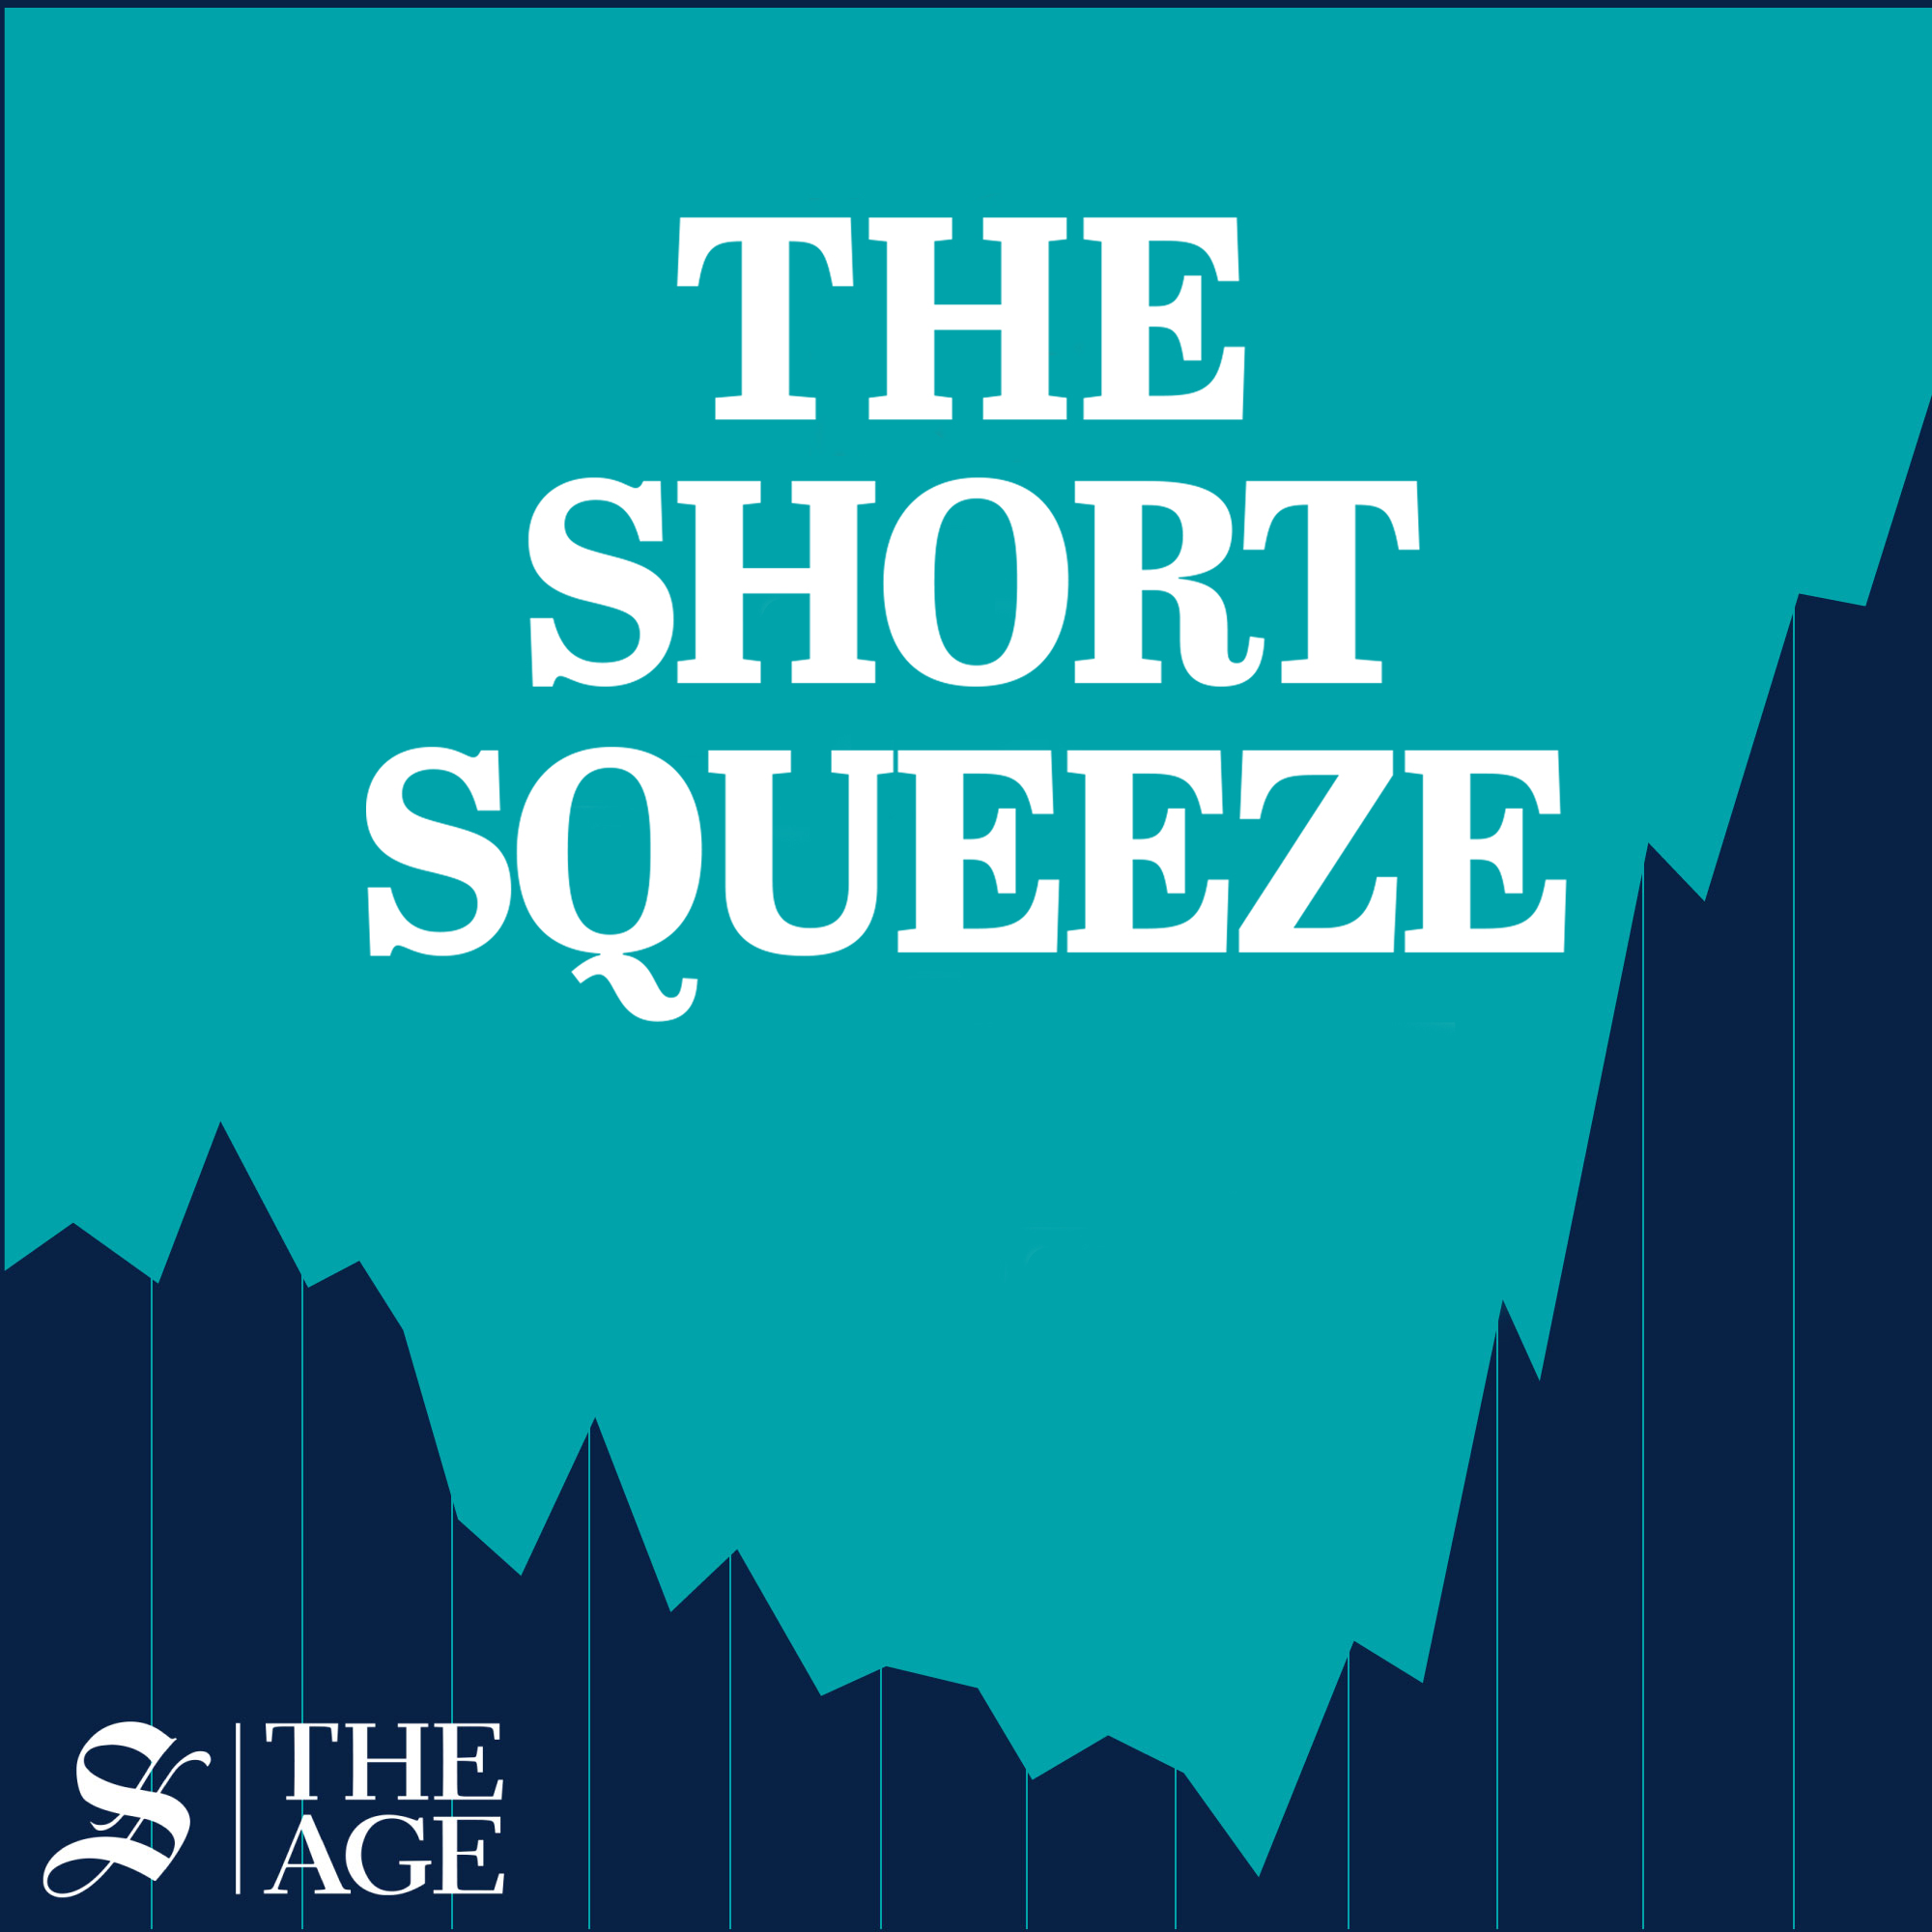 The Short Squeeze: Shot in the arm for markets?